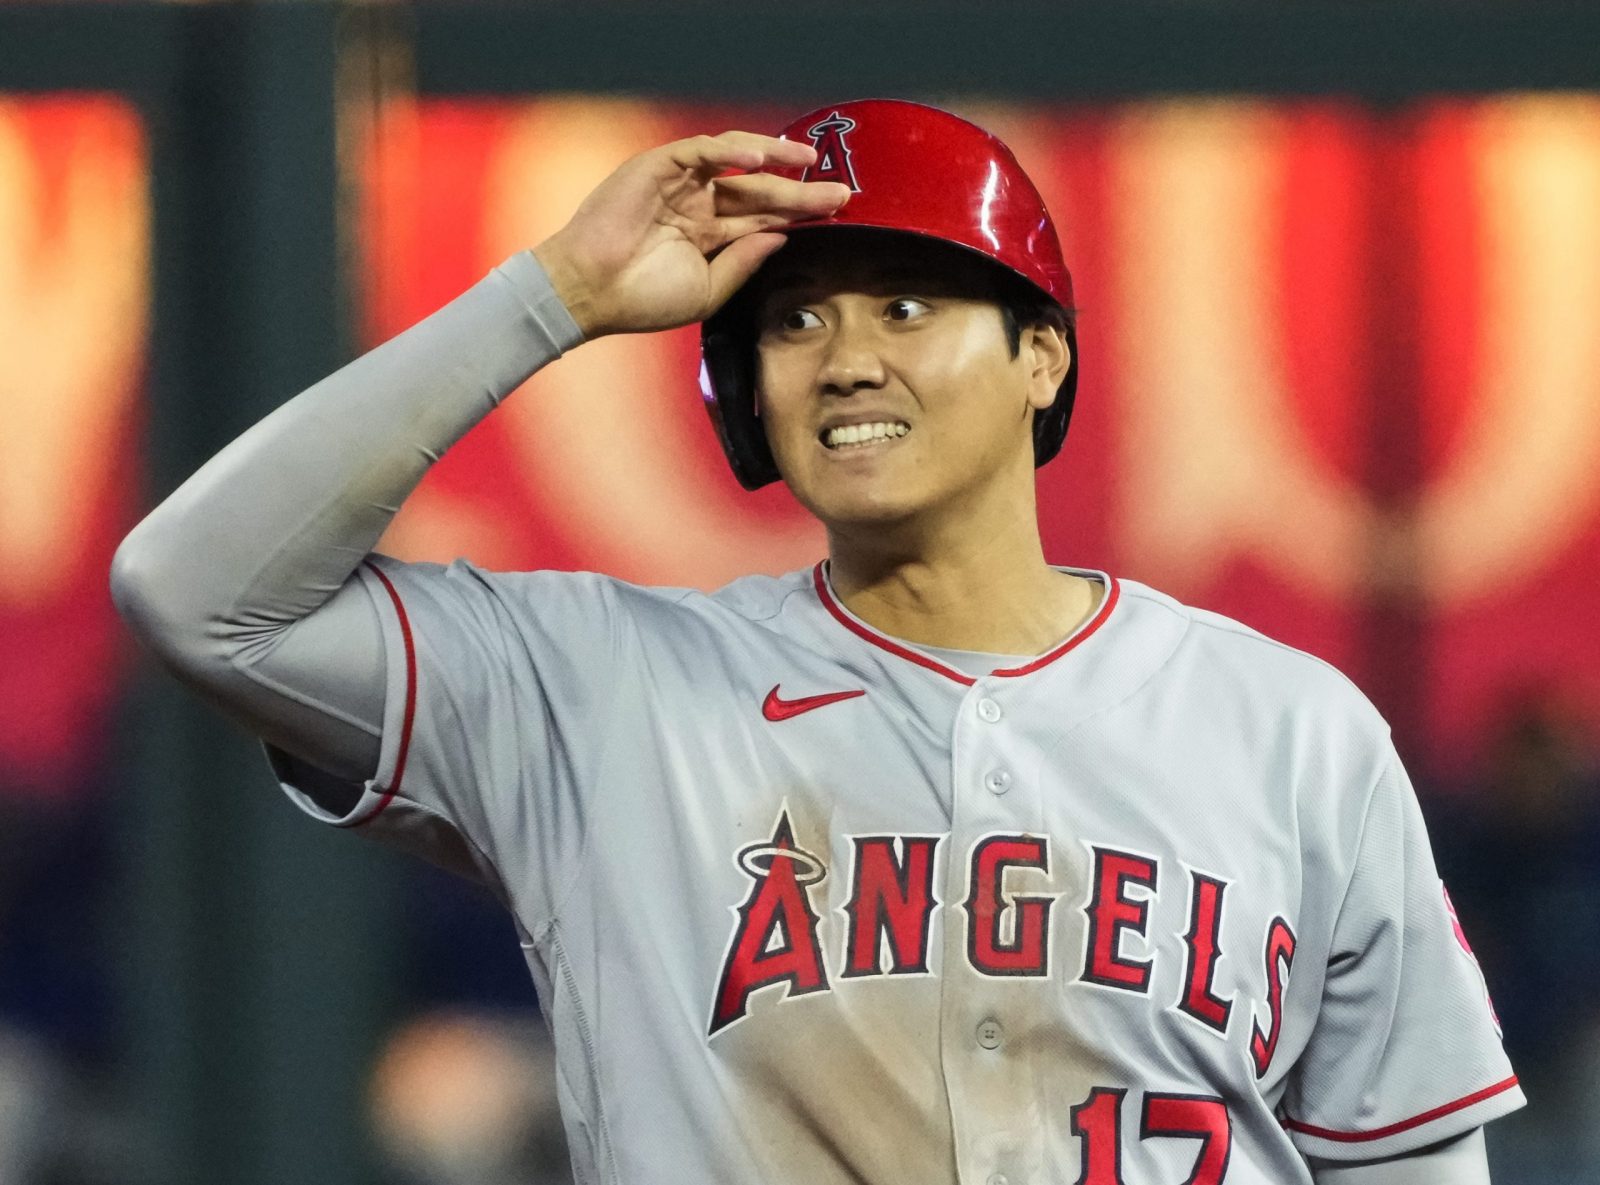 Shohei Ohtani displays an act of Japanese politeness at the Angels dugout